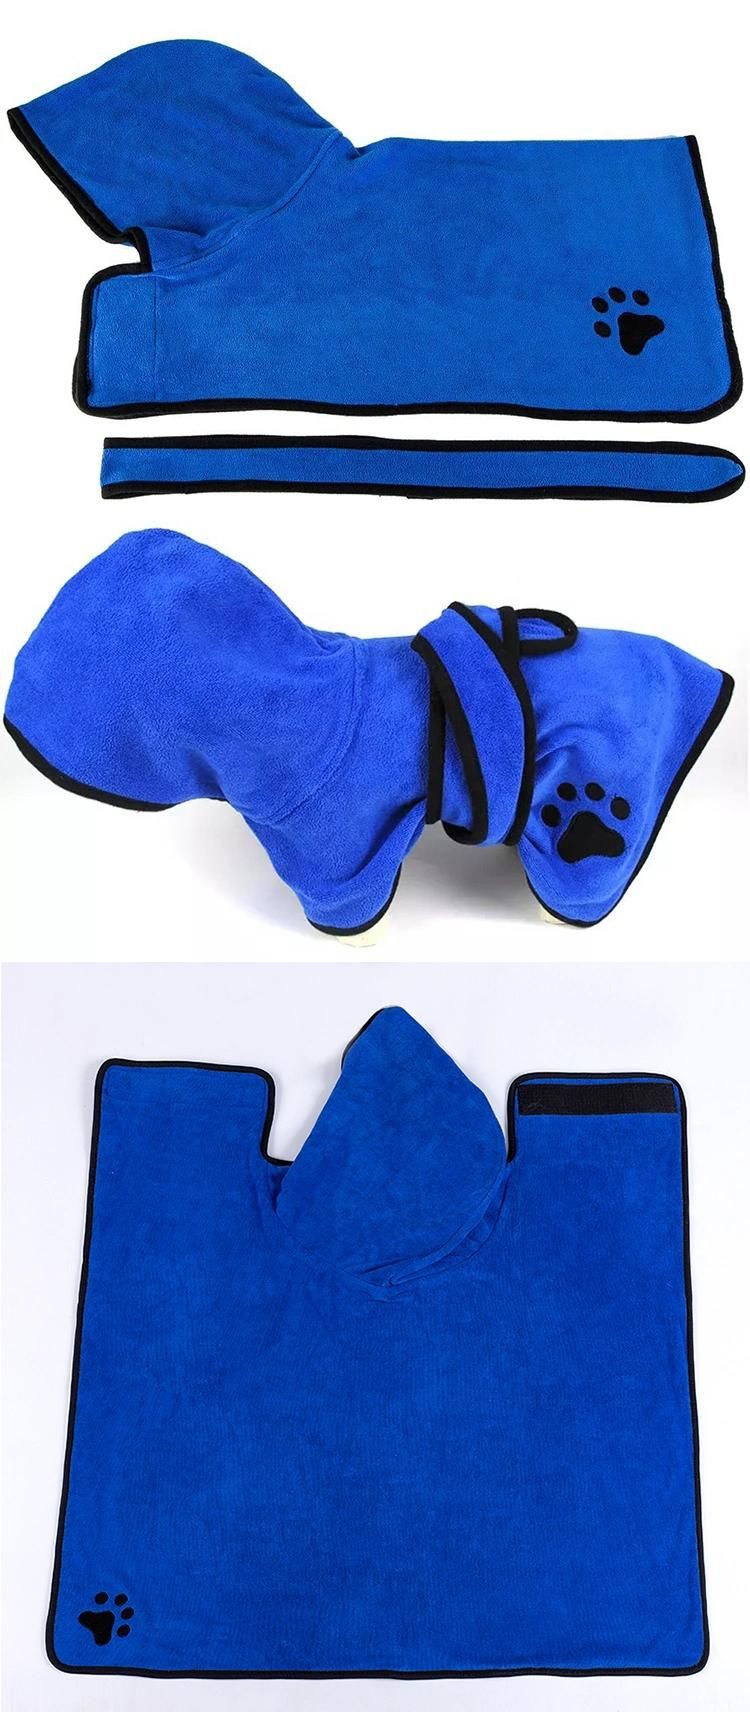 Soft Super Absorbent Microfiber Dog Drying Towel Robe with Hood and Belt for Large Medium Small Dogs